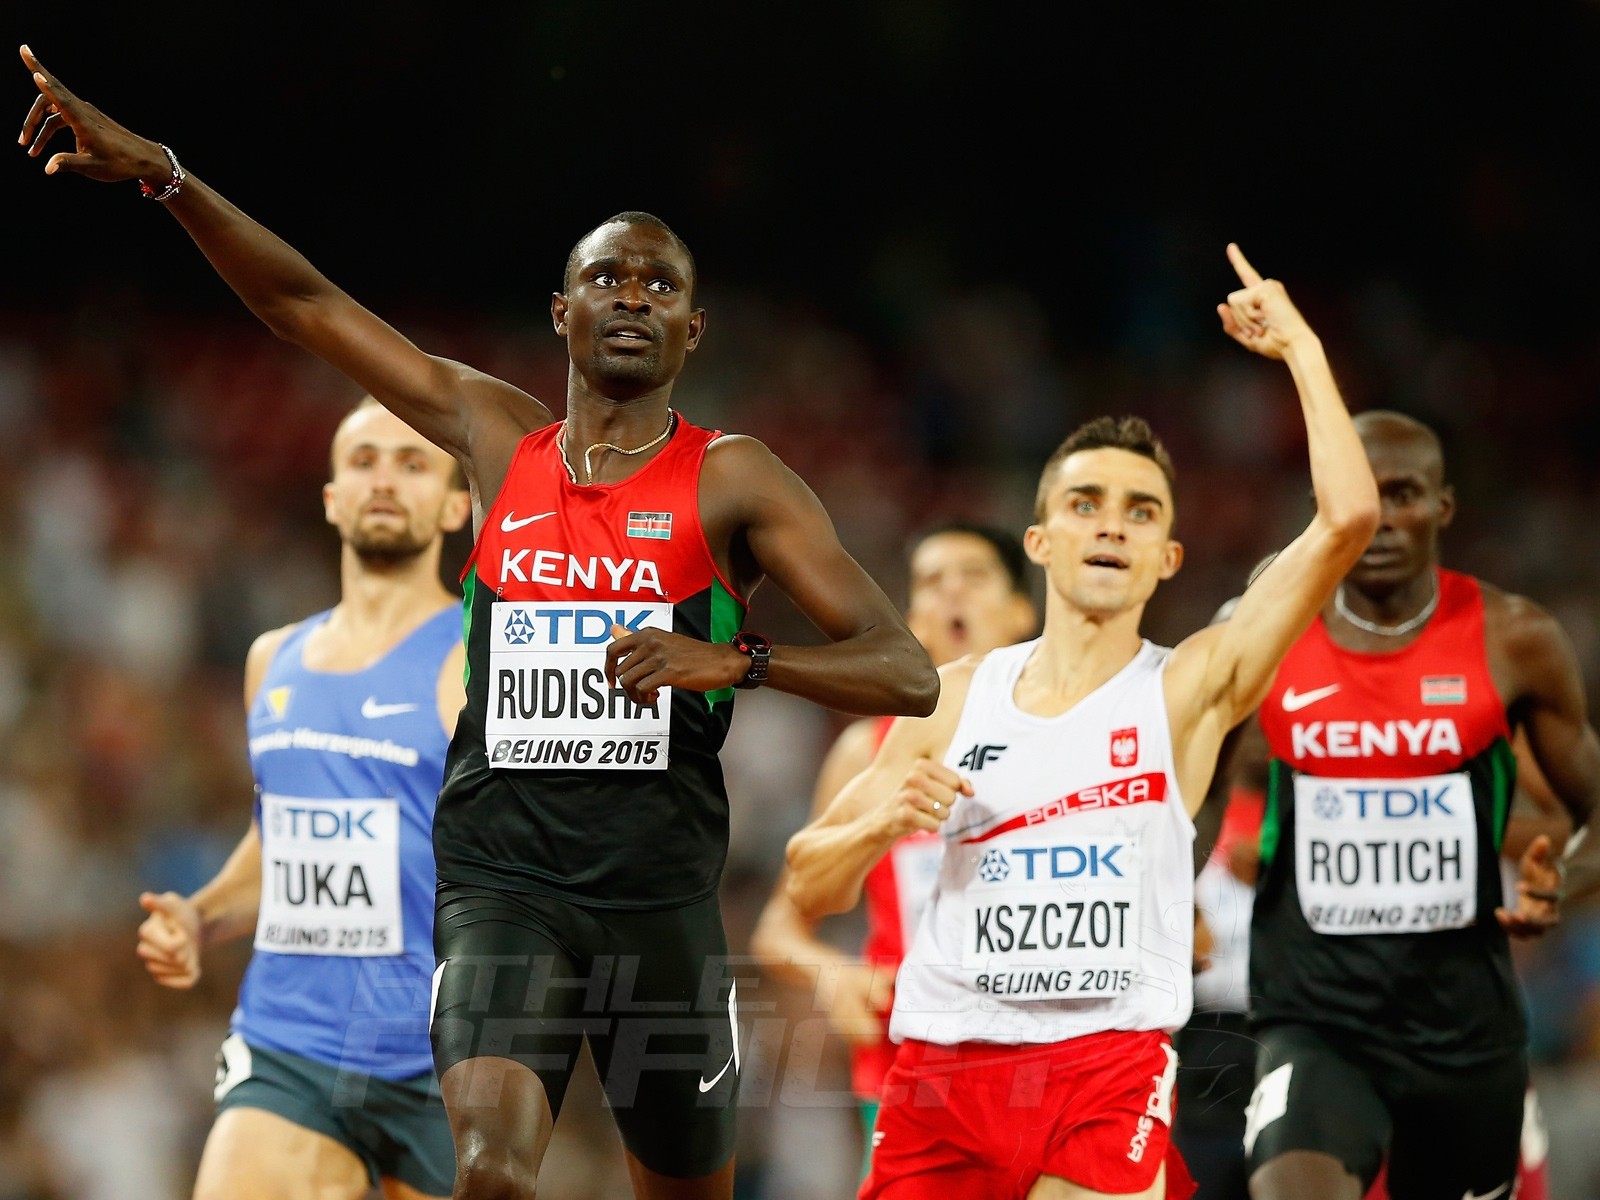 David Rudisha of Kenya winning men's 800m final on Day 4 at the 2015 IAAF World Championships in Beijing, China / Photo credit: Getty Images for the IAAF